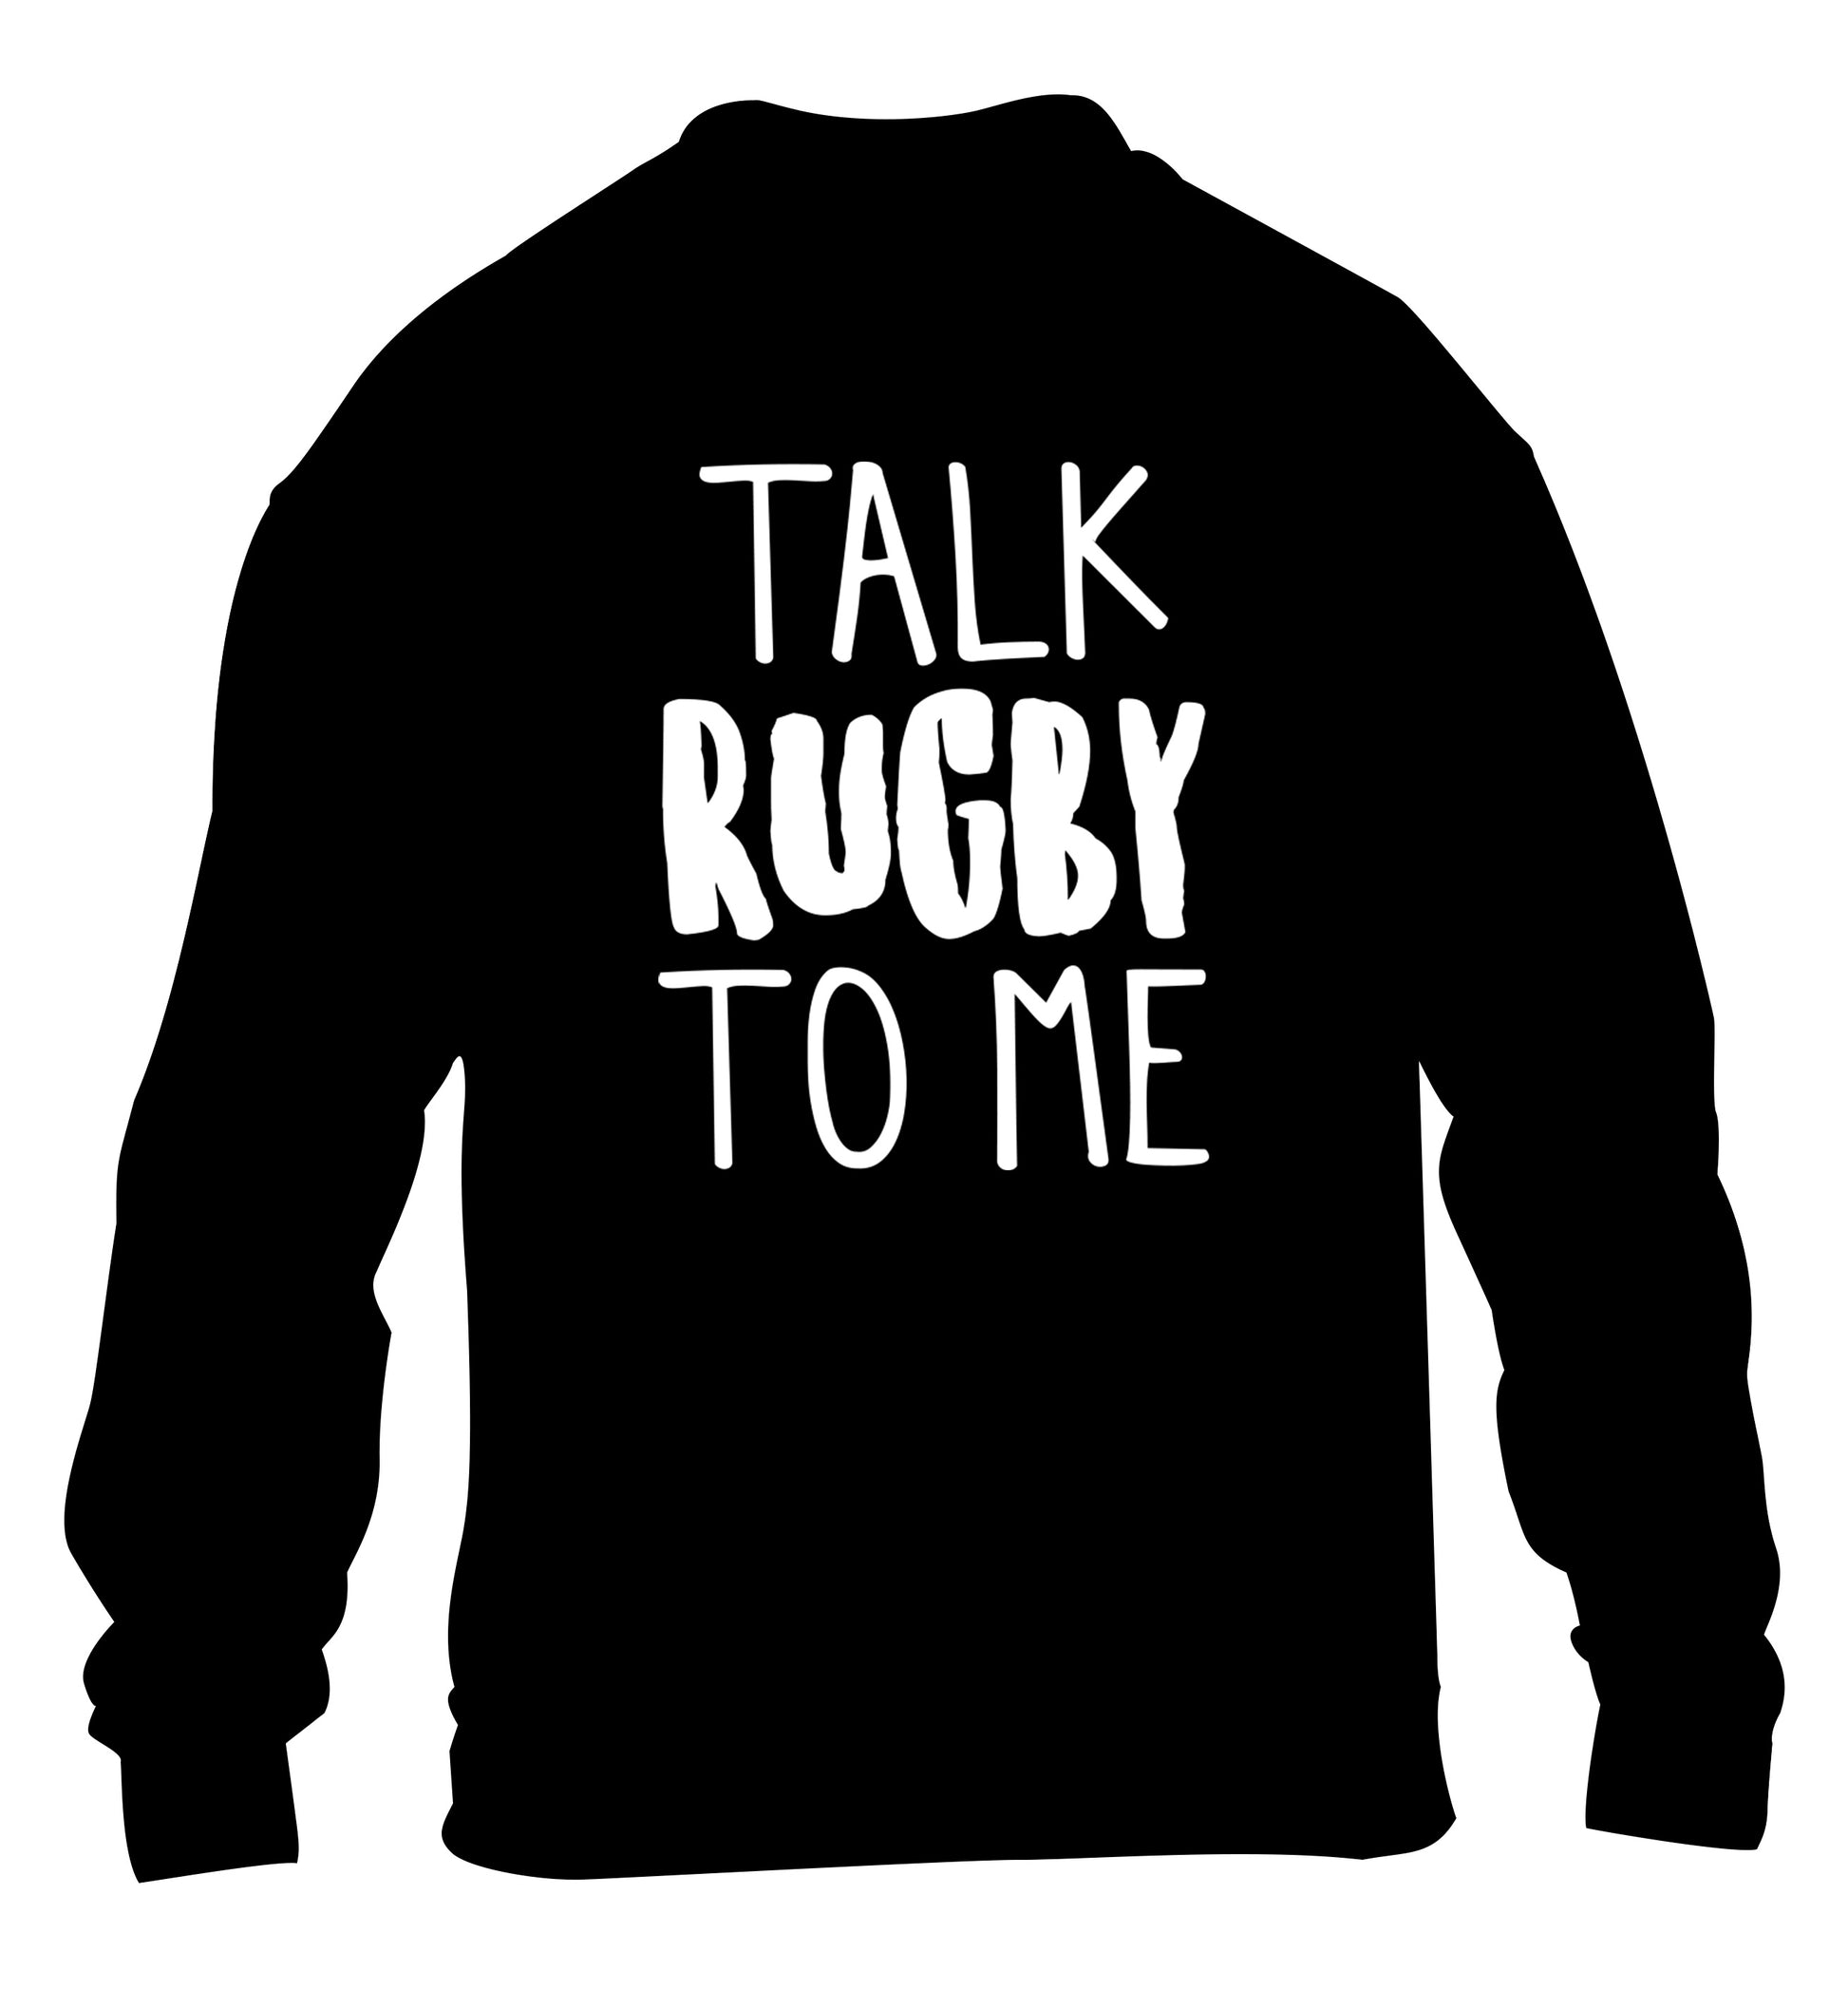 Talk rugby to me children's black sweater 12-13 Years